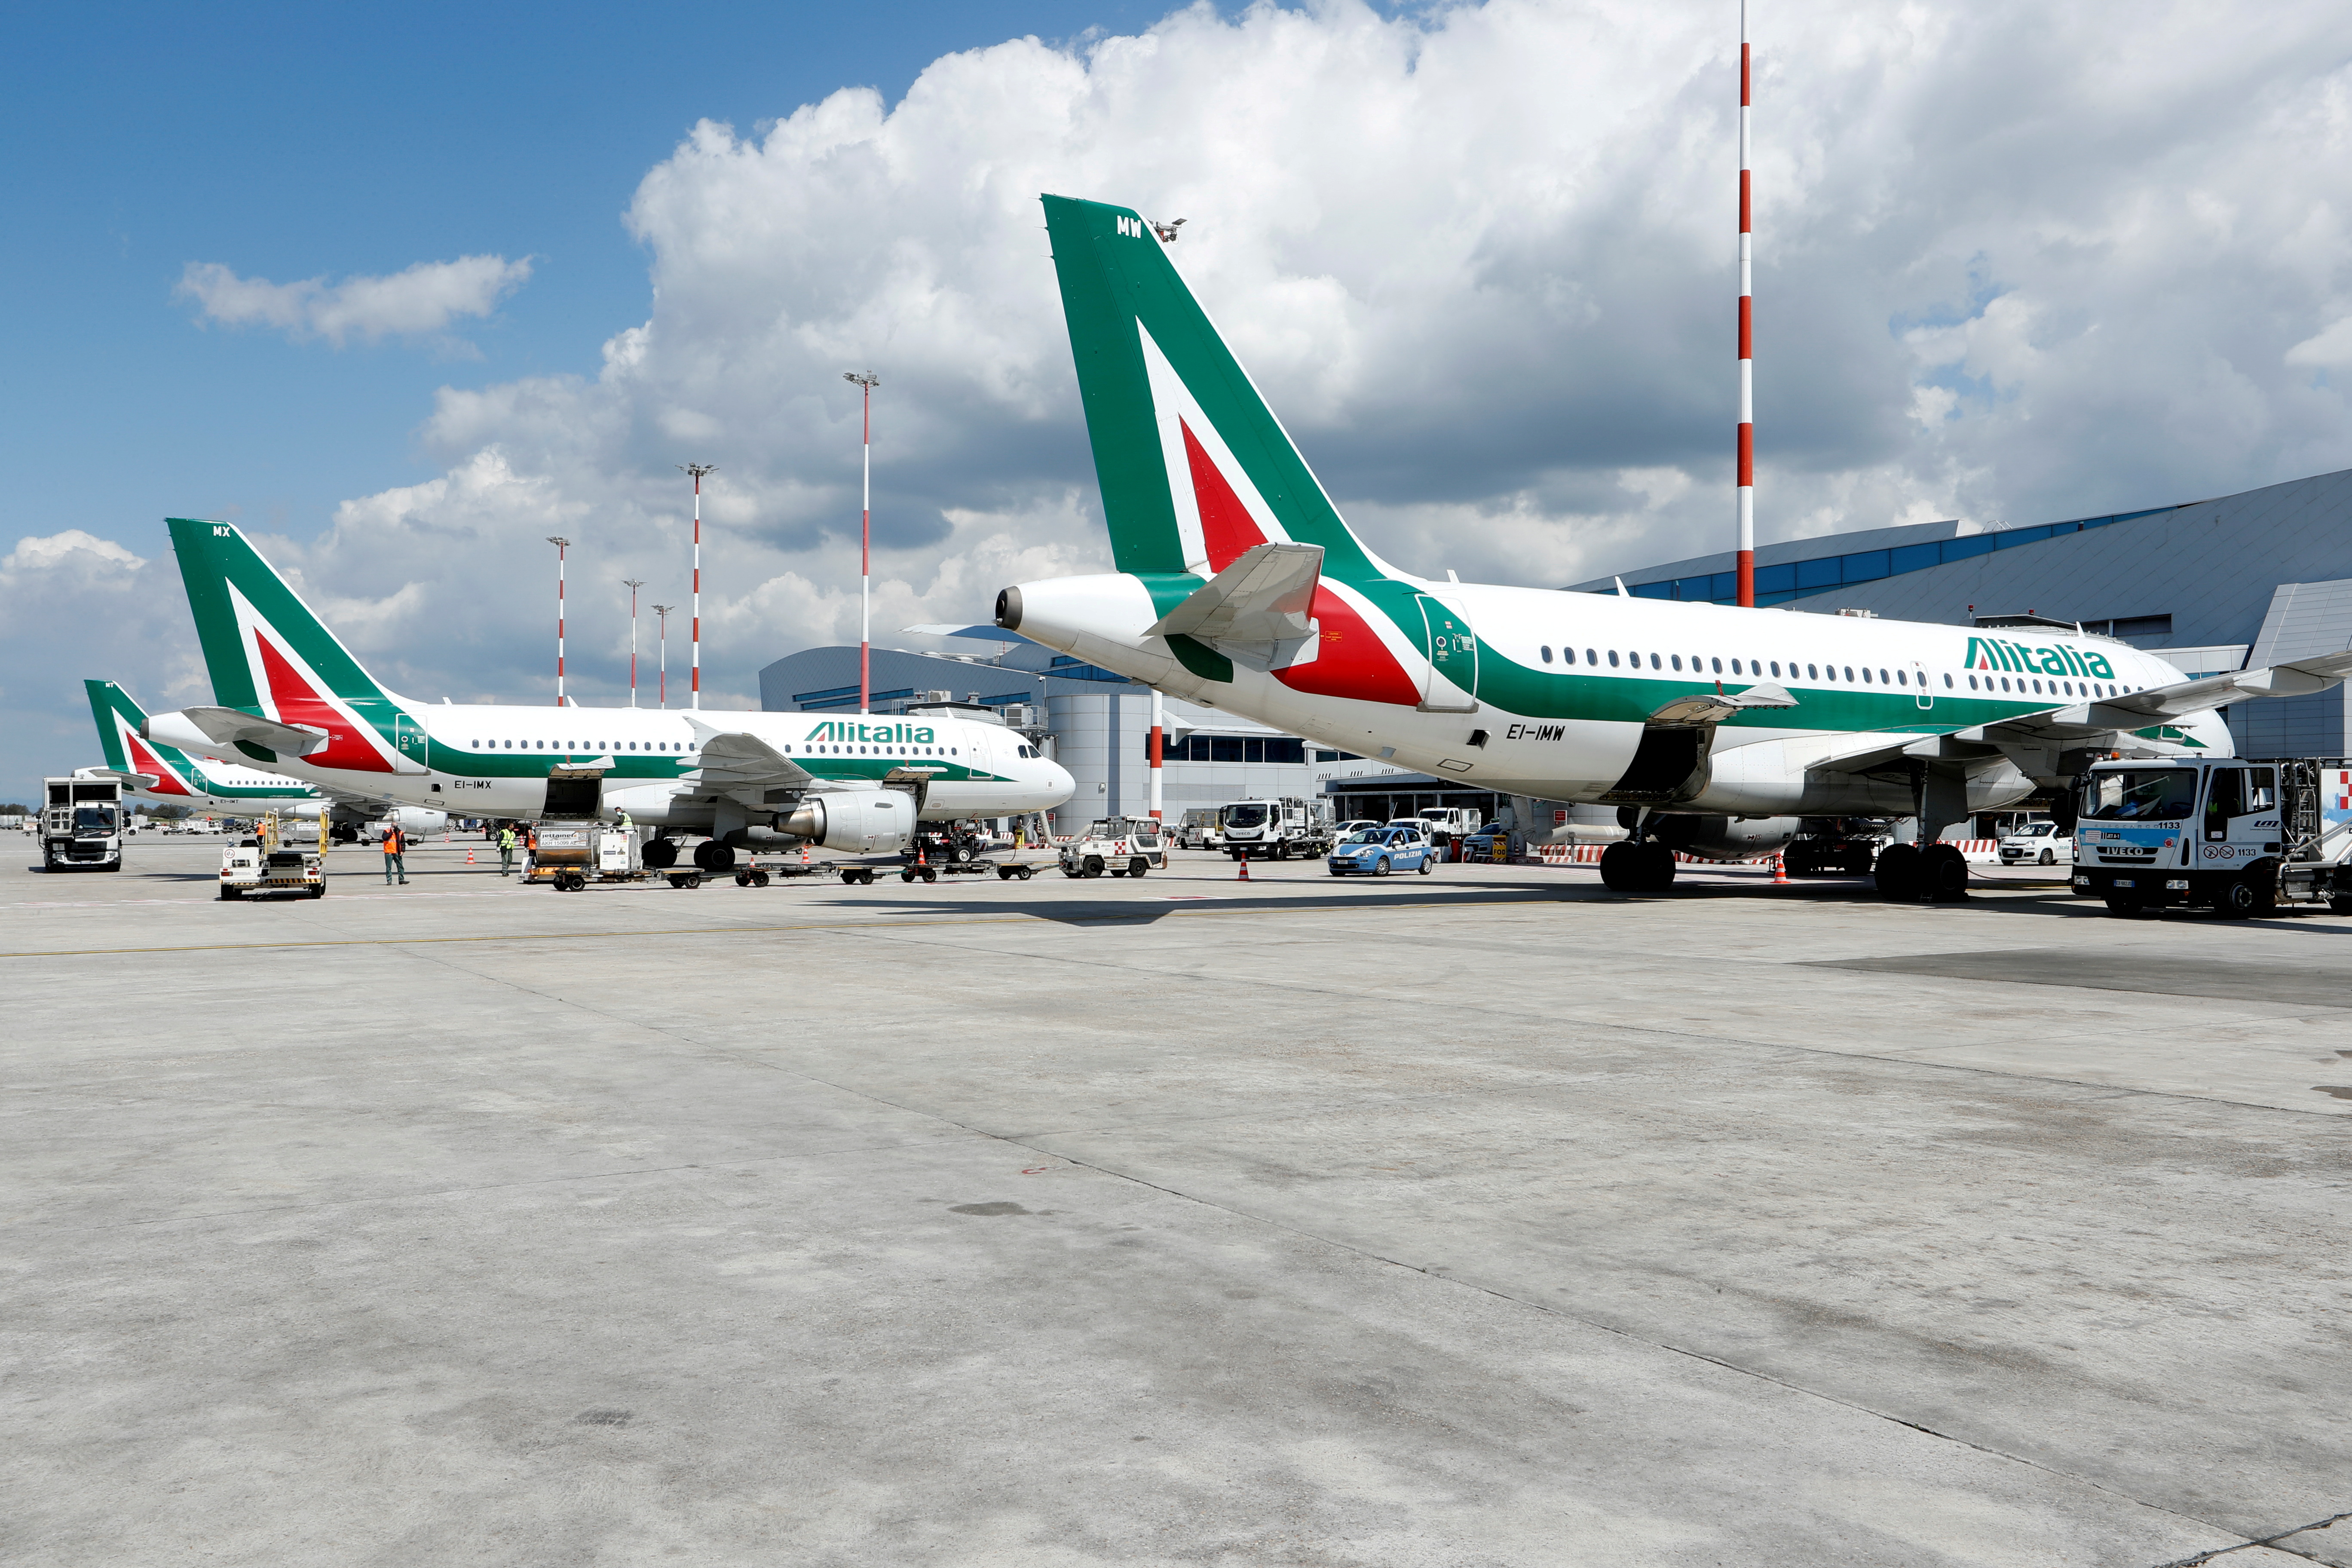 Alitalia planes are seen on the tarmac at Fiumicino International Airport as talks between Italy and the European Commission over the revamp of Alitalia are due to enter a key phase, in Rome, Italy, April 15, 2021. REUTERS/Remo Casilli